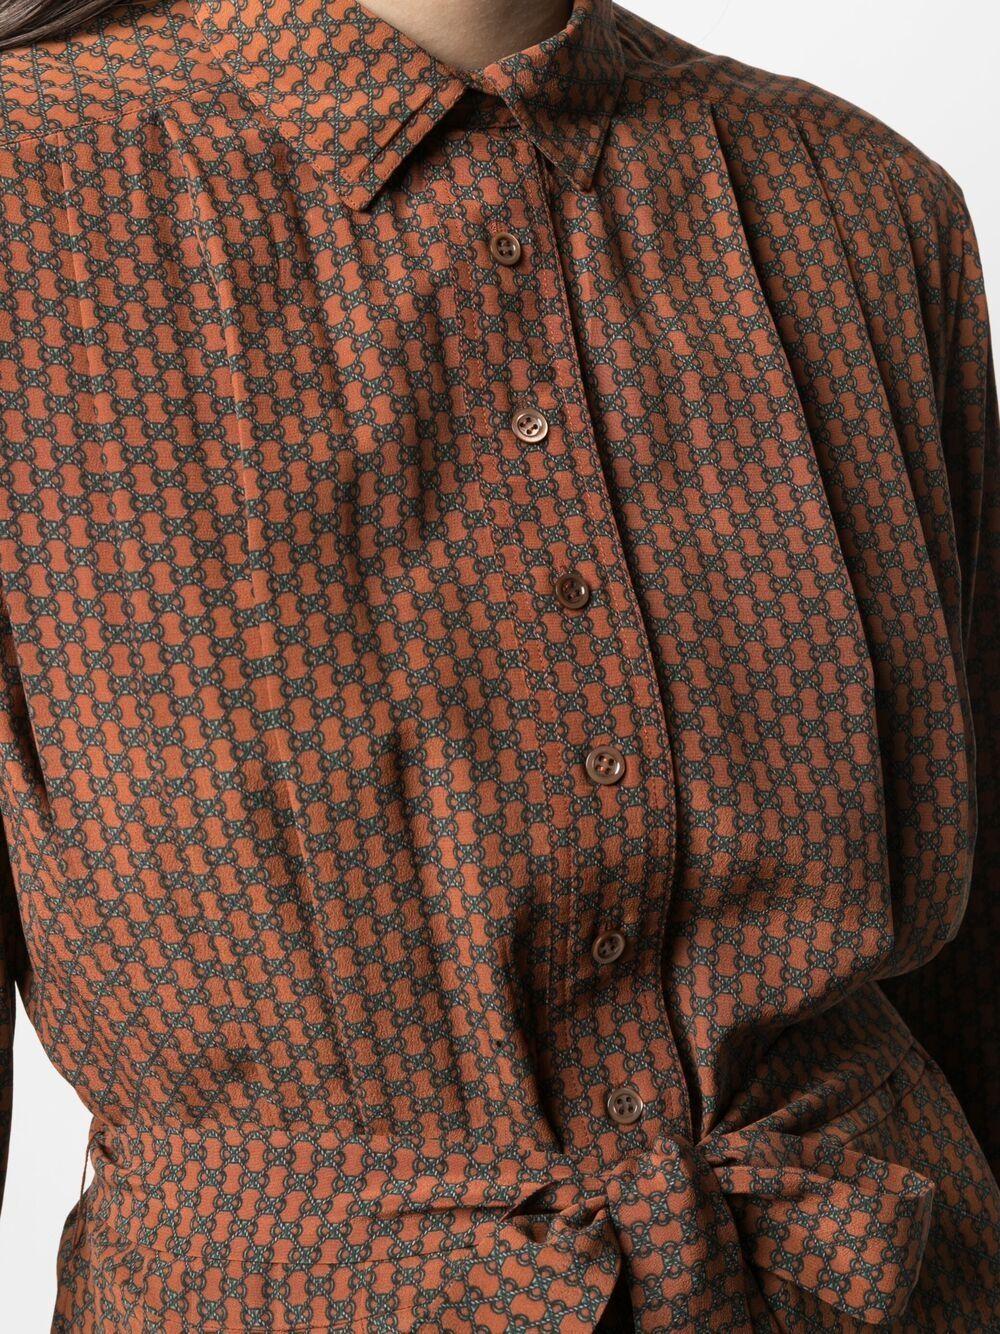 Hermes nut silk shirt dress featuring an all-over chain print, a spread collar, a front button fastening, a separated belt, a straight hem, long sleeves.  
Composition: 100% silk 
Estimated size: 40fr/US8/UK12
In good  vintage condition. Made in